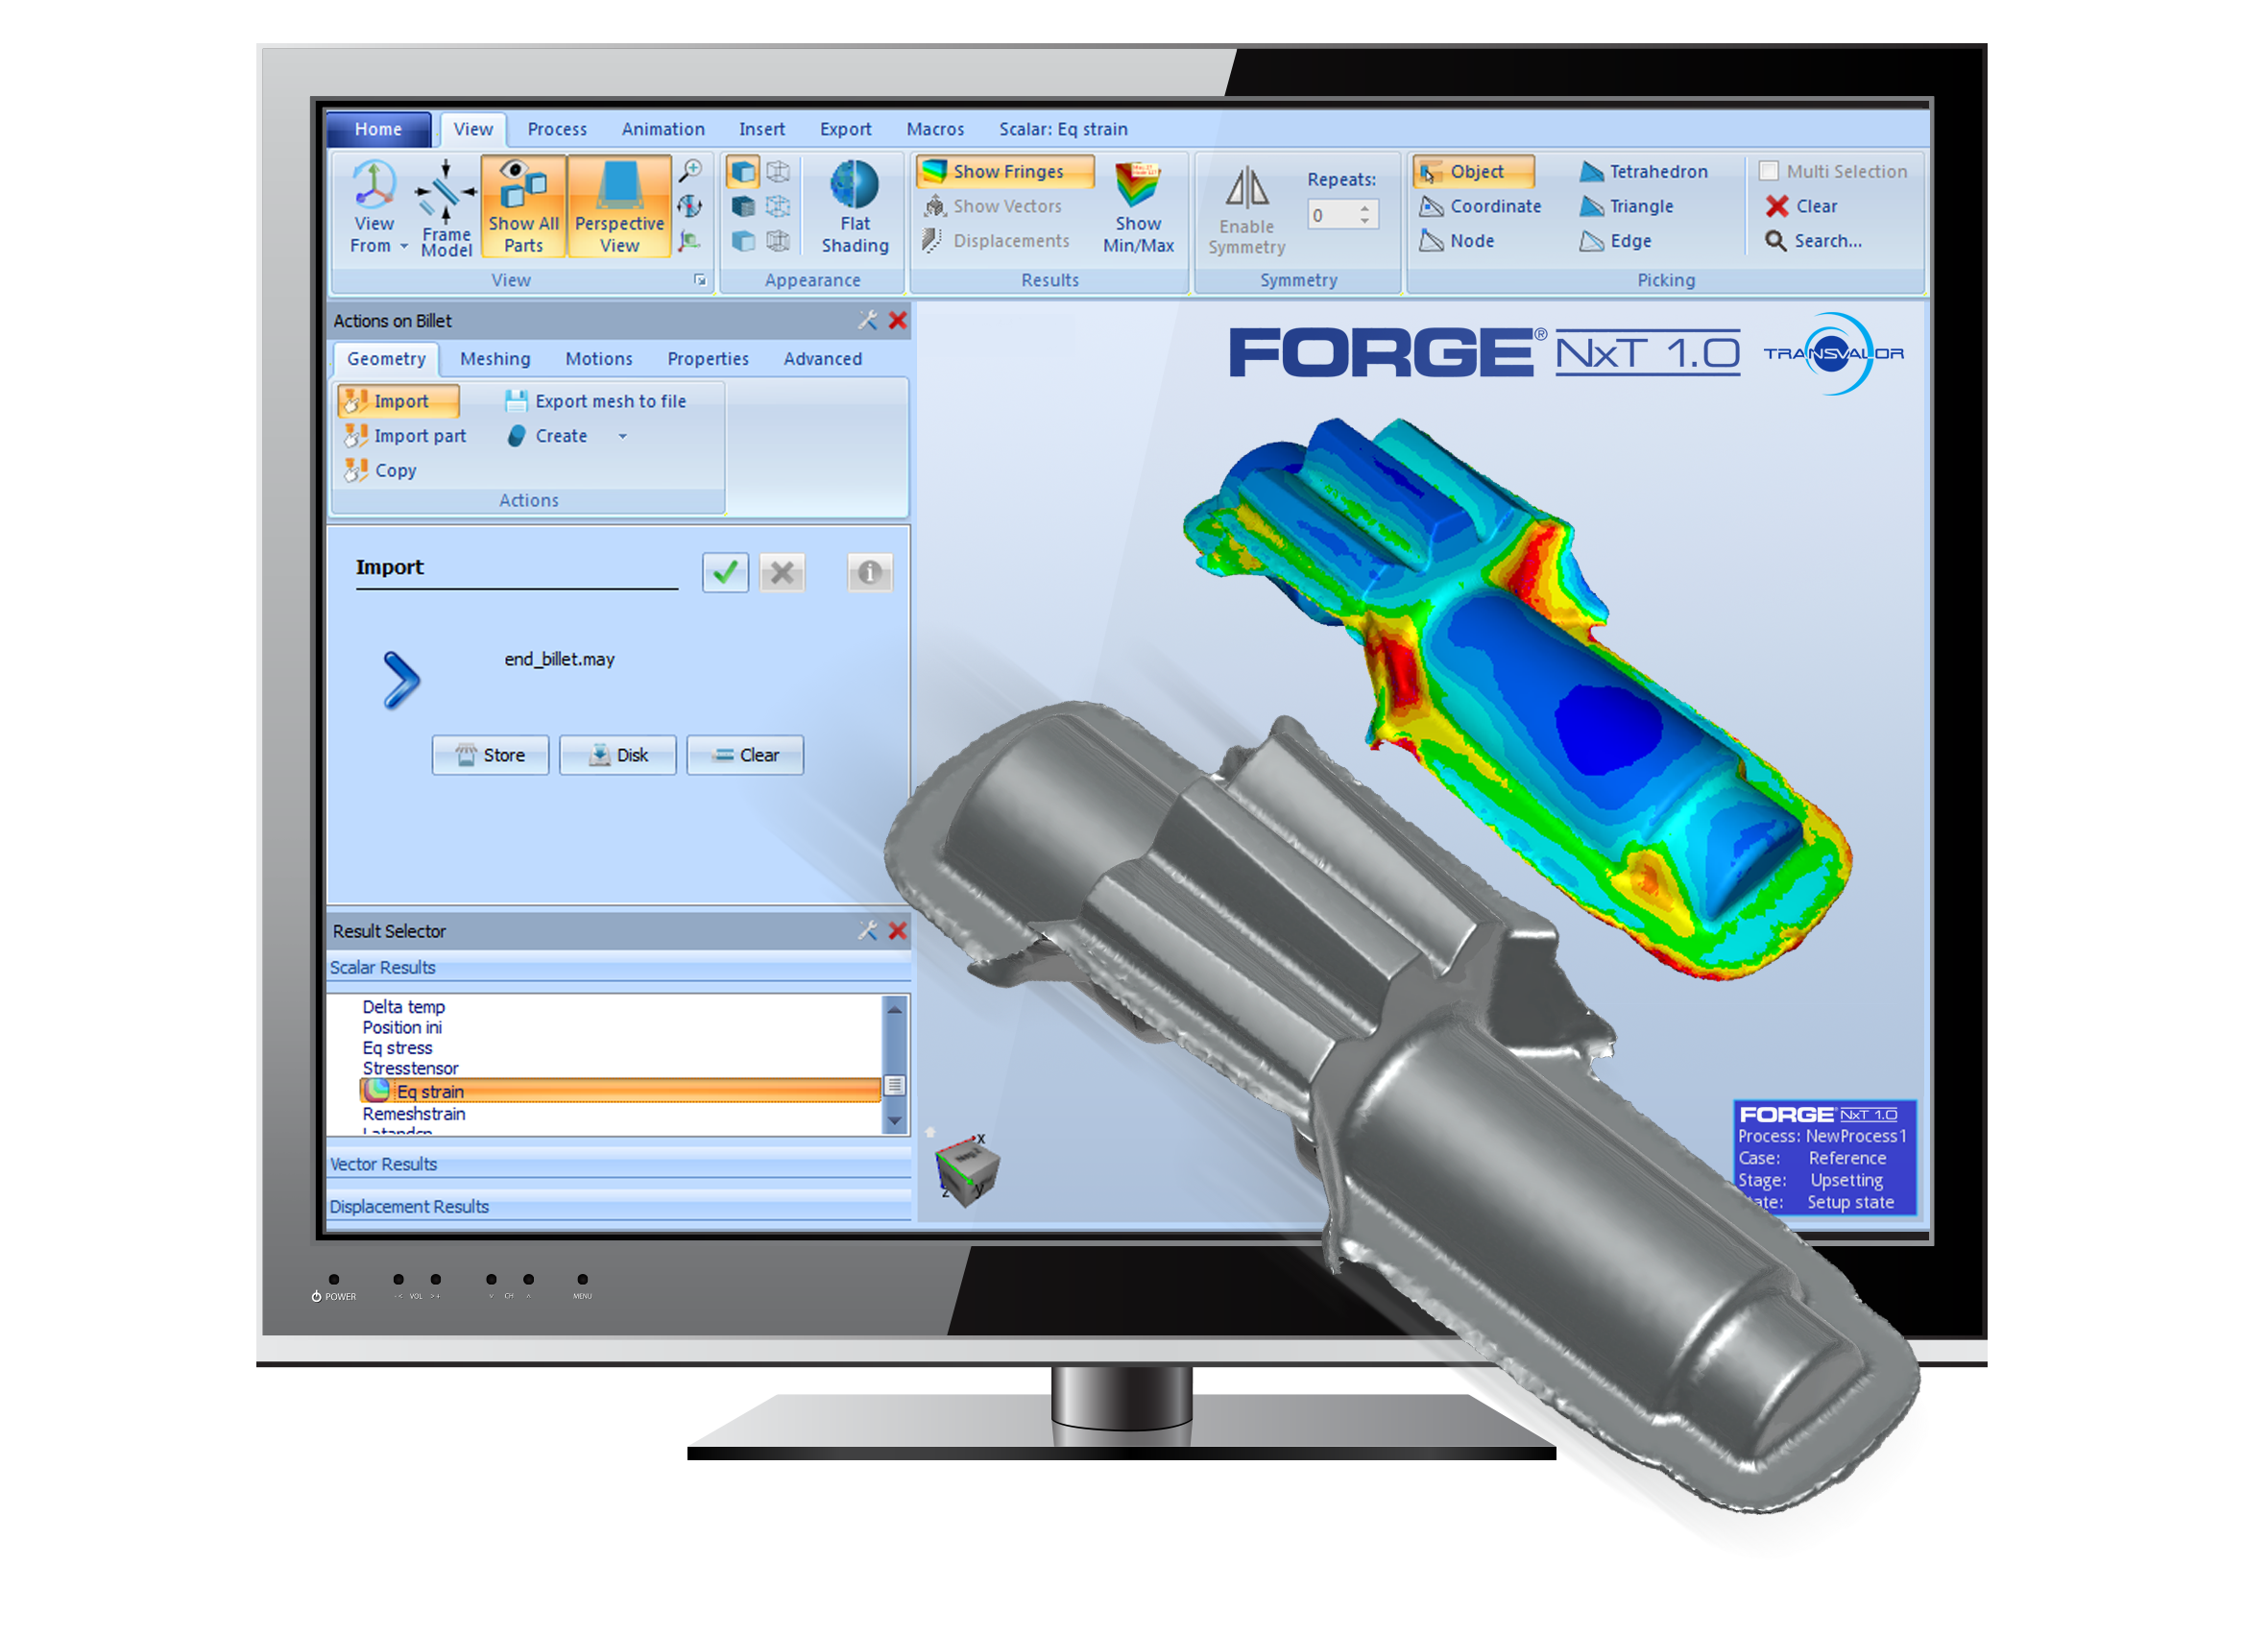 EnginSoft - Forge